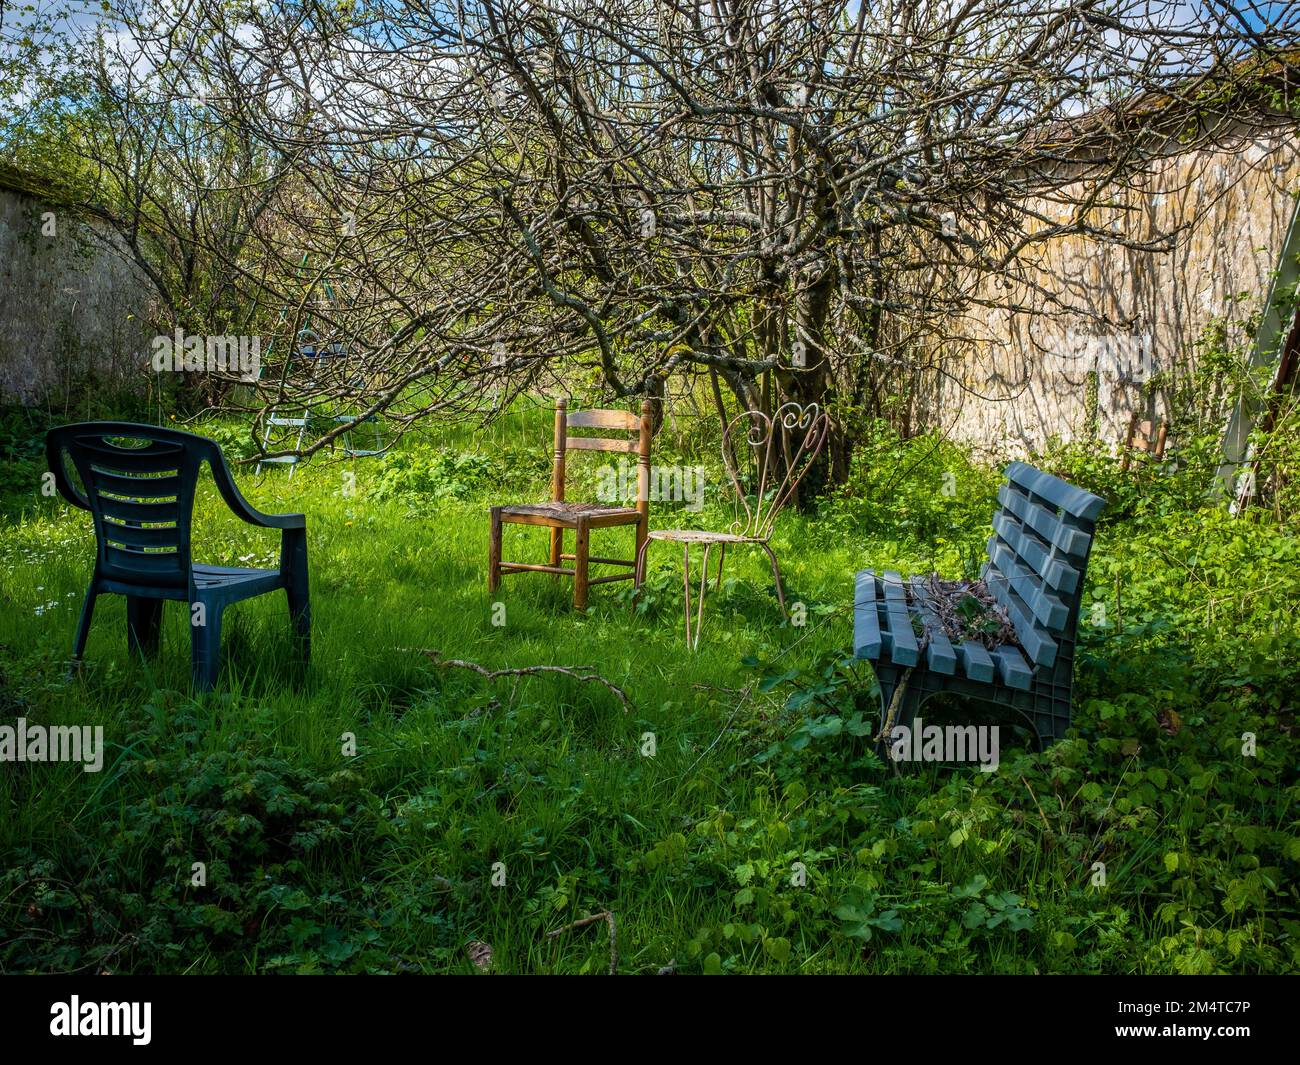 Abandoned chairs and a bench in an overgrown lawn closed with limestone walls, taken in the town of Thomery, near Paris on an early spring sunny day Stock Photo